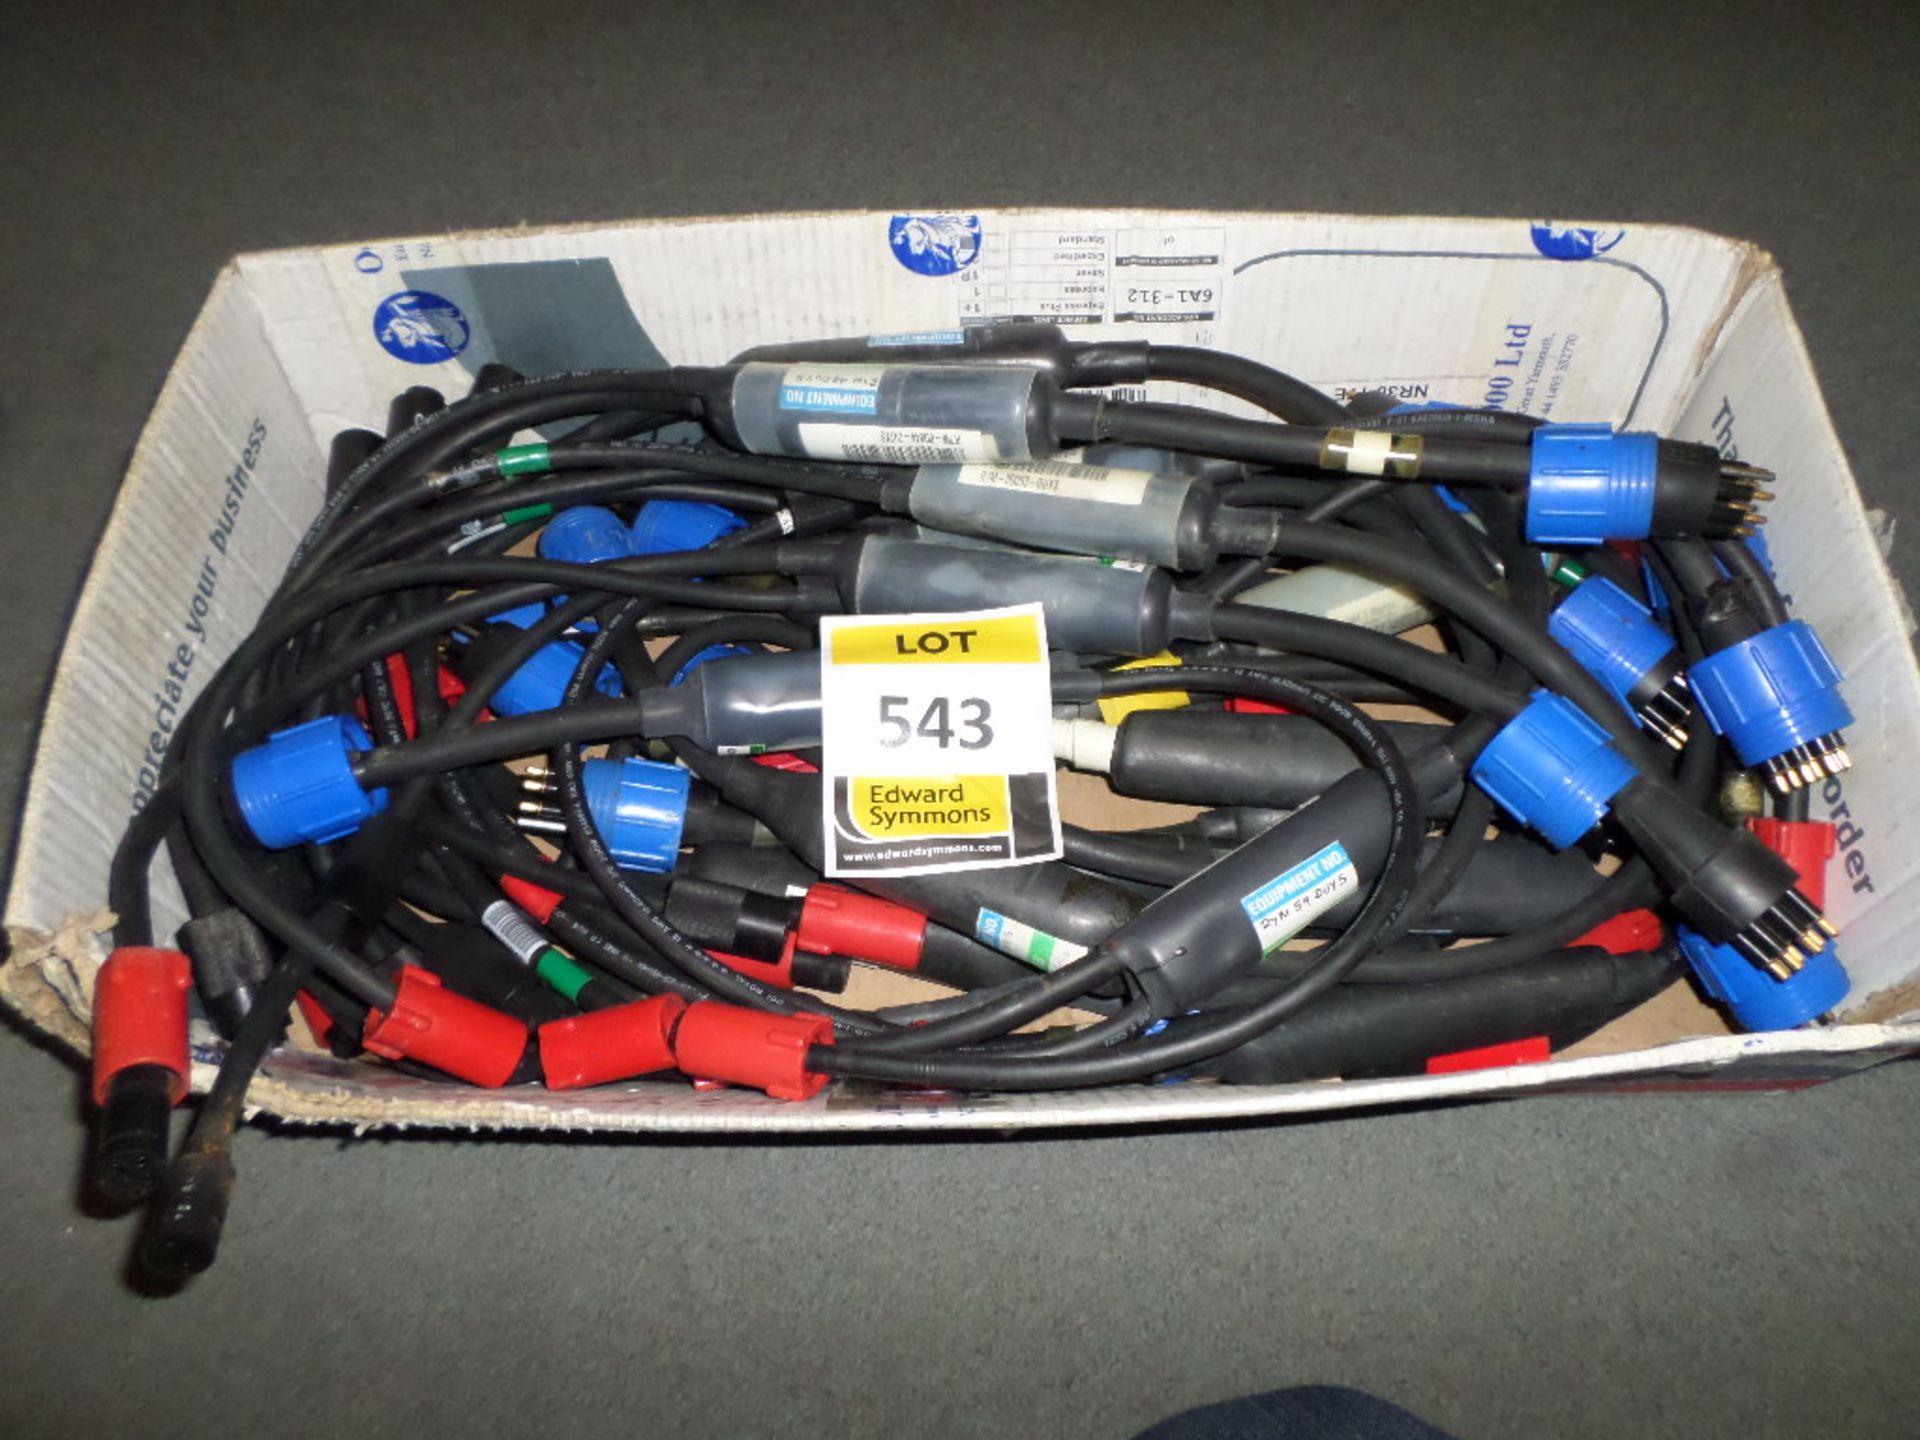 19 diver's umbilical "Y-Splice" connections (This equipment will need to be fully tested in